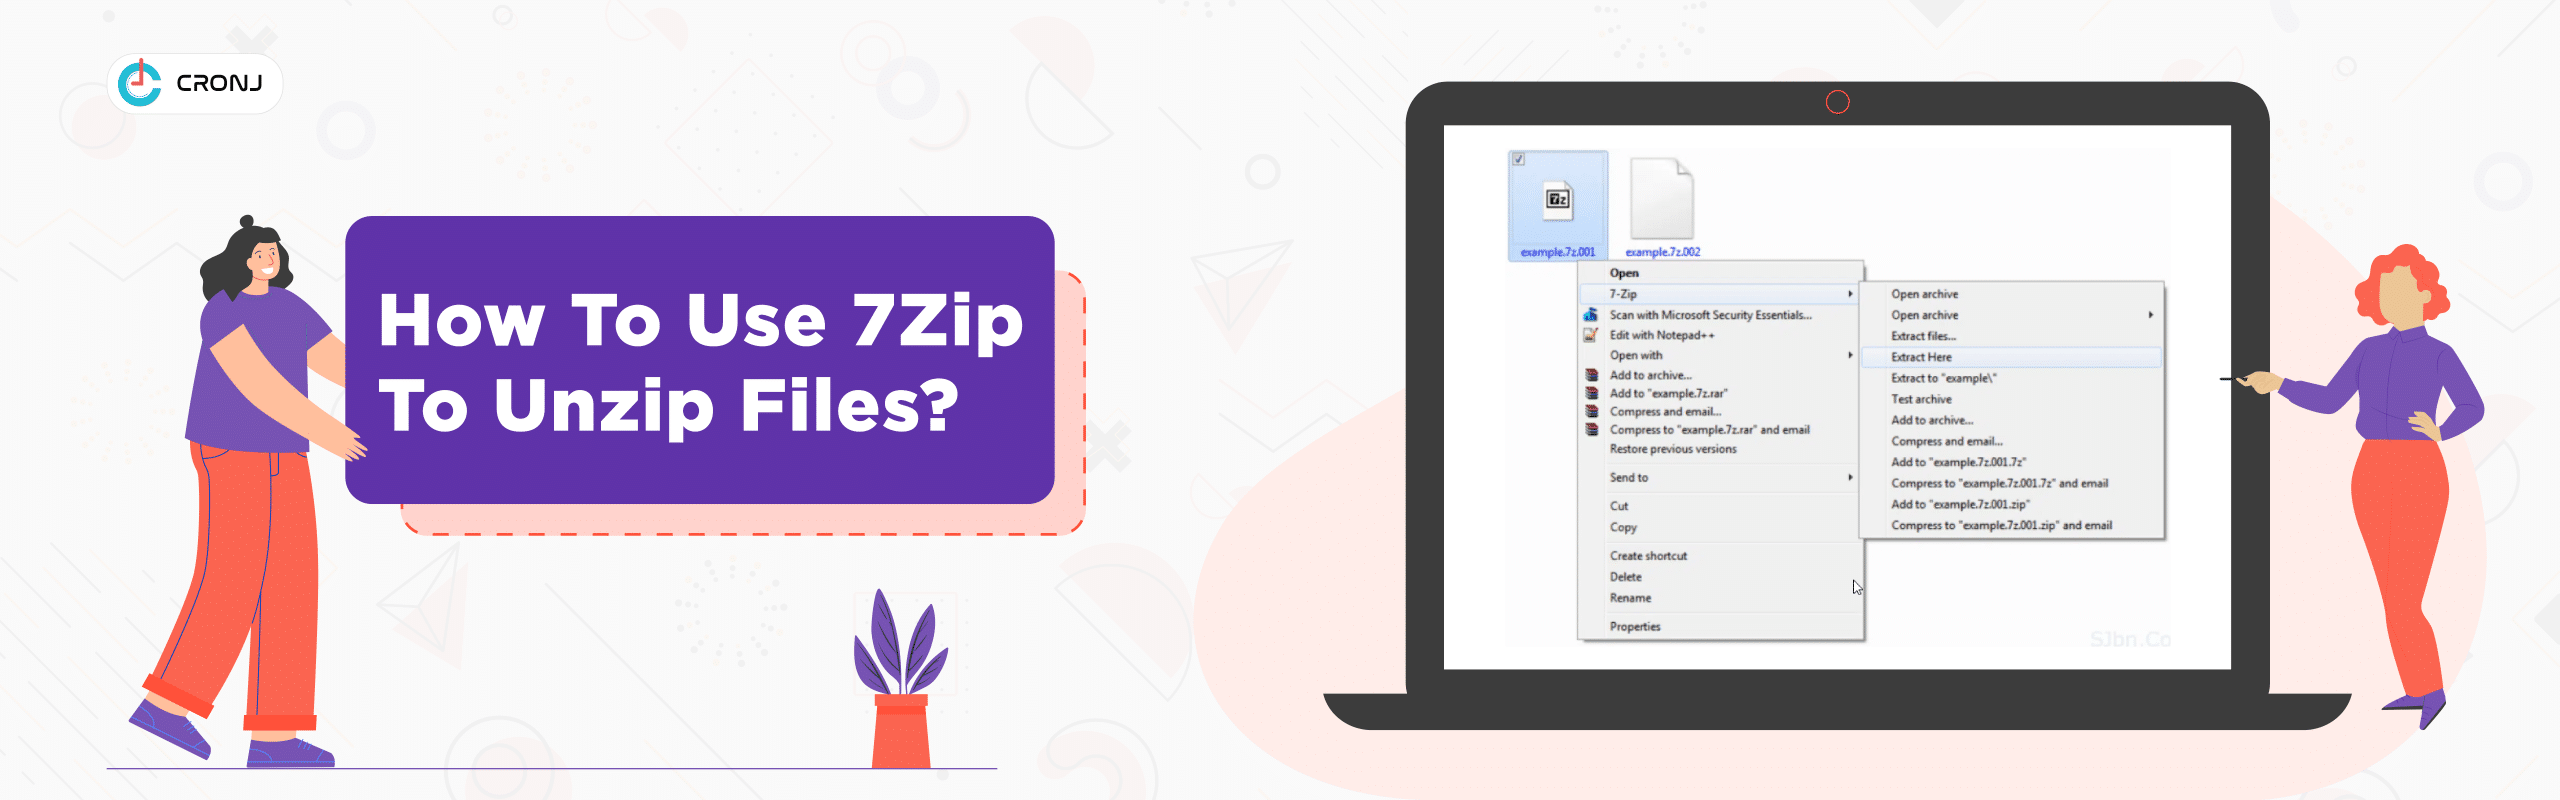 Check the downloaded file's integrity and size to ensure it is complete.
If the file is compressed, use a file extraction software like WinRAR or 7-Zip to extract it.